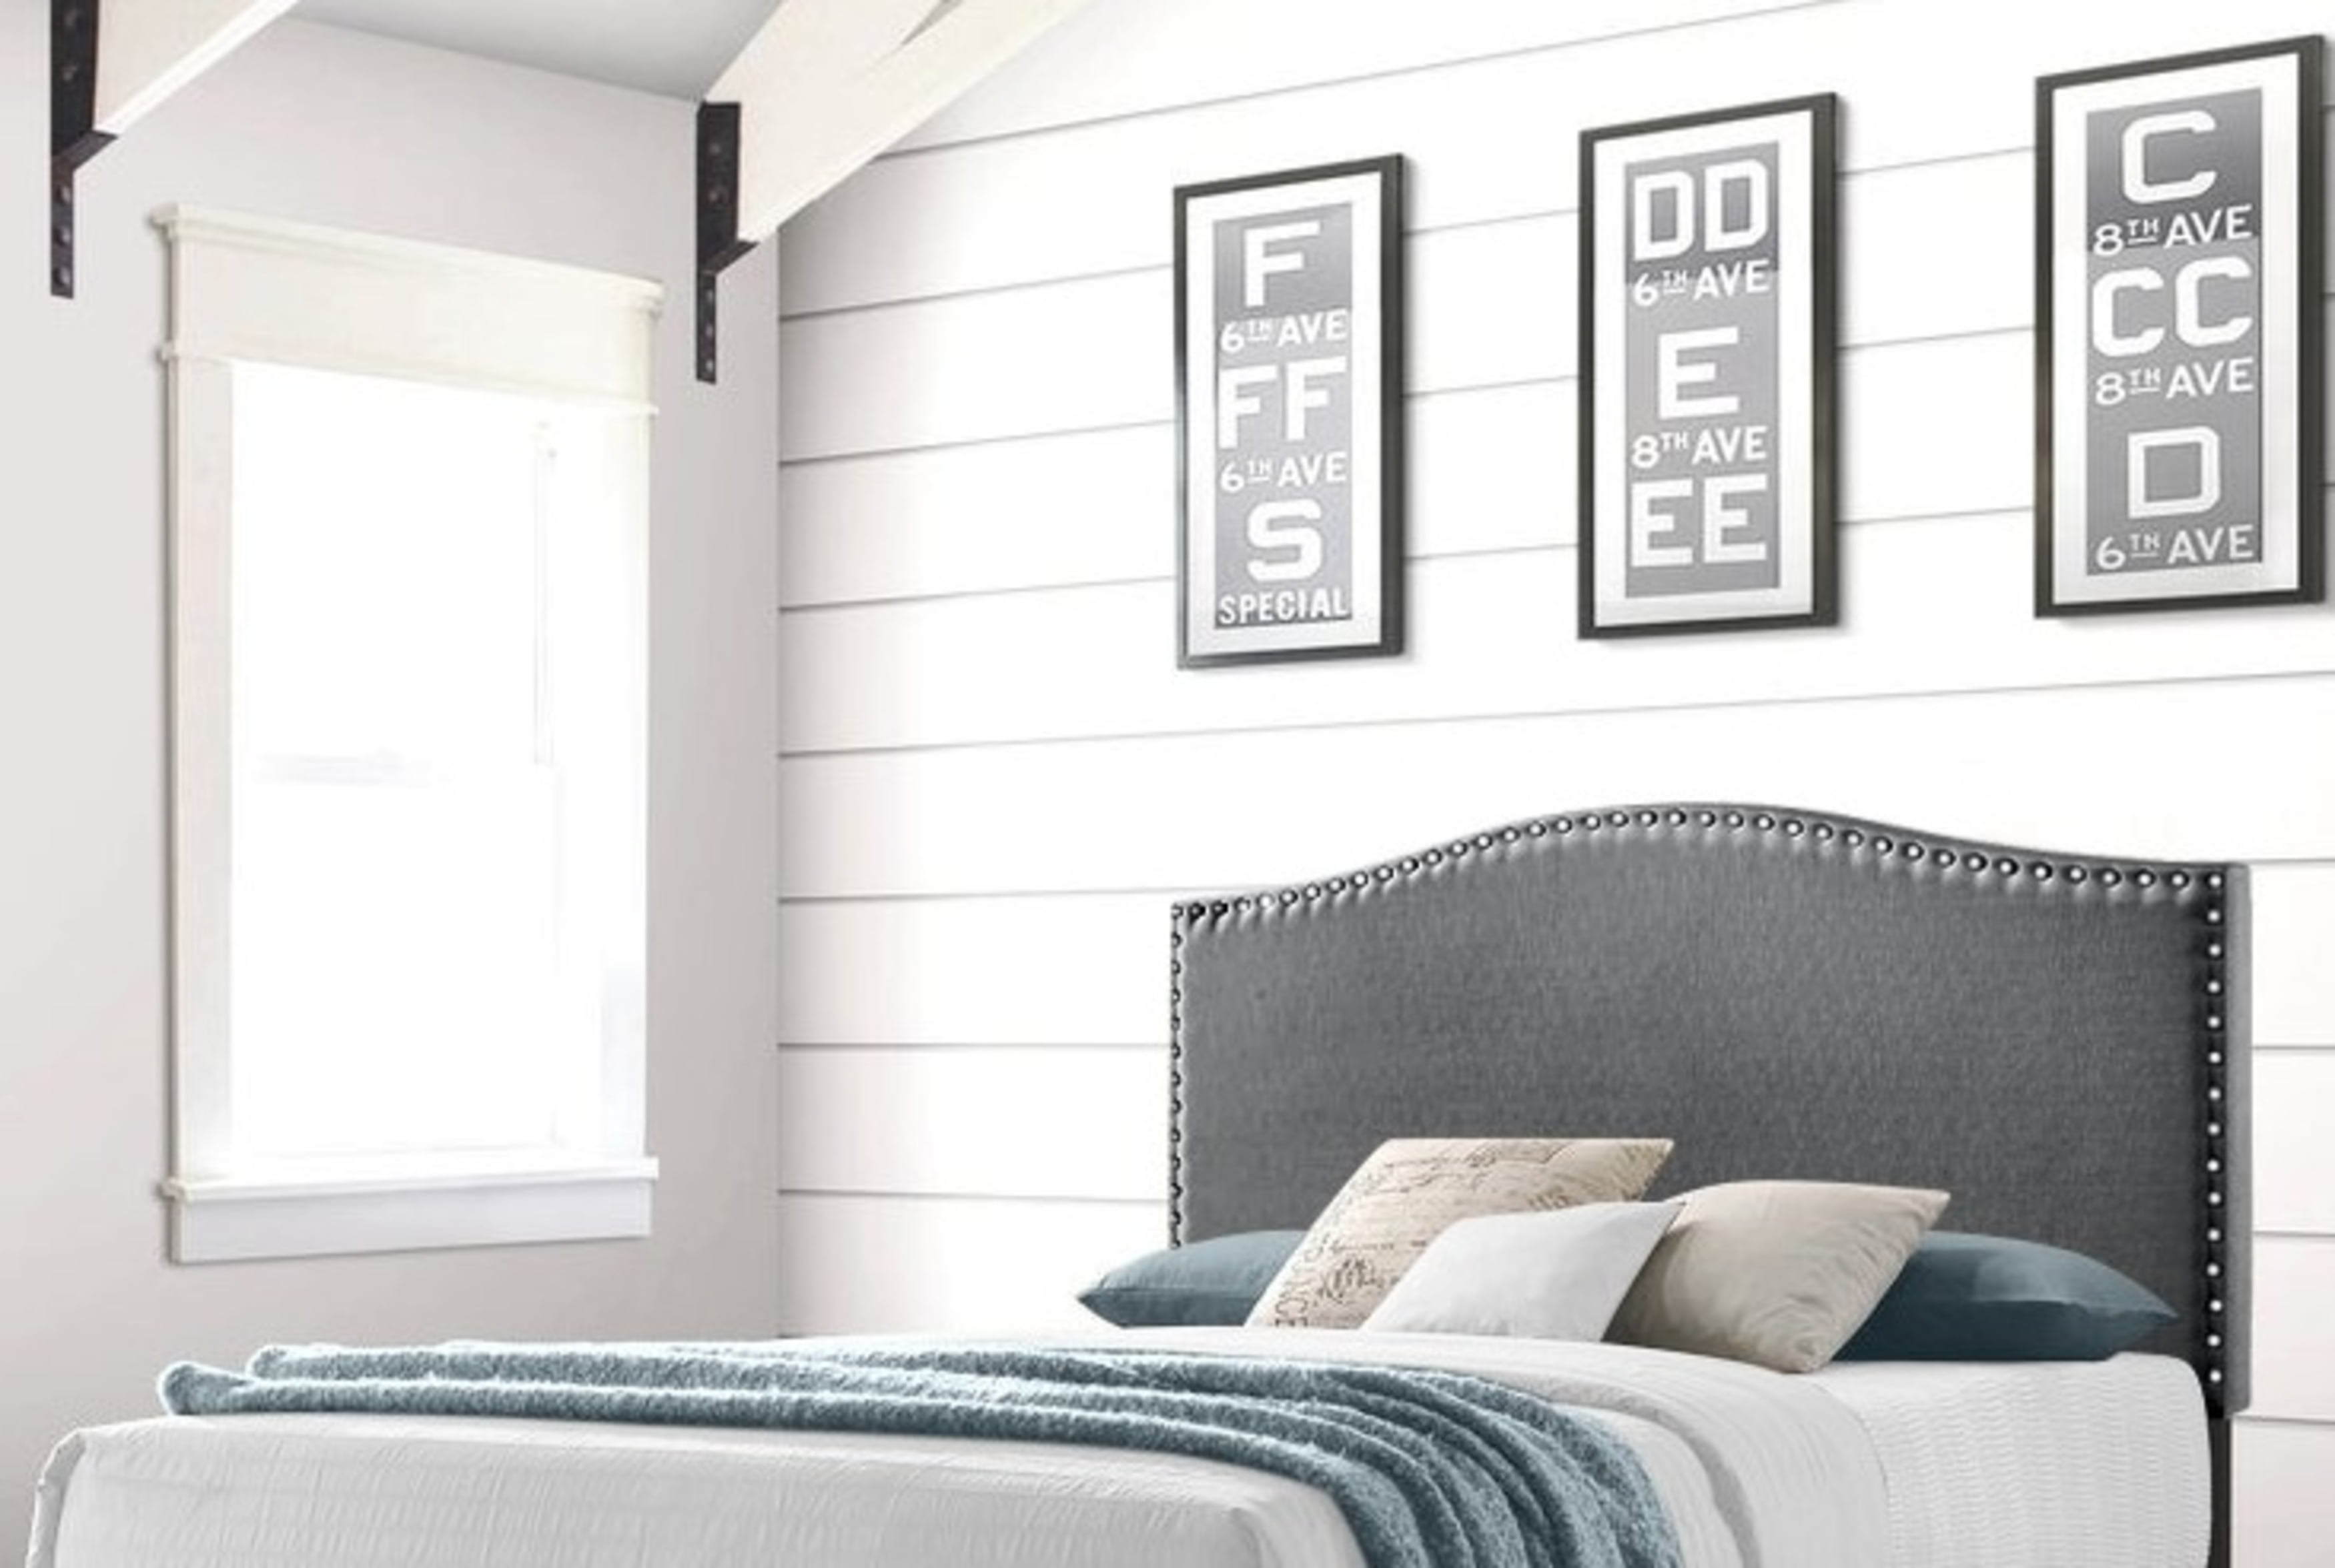 Picture of Belle Isle Furniture CIH78-0C00 Ivey King Size Headboard - Grey